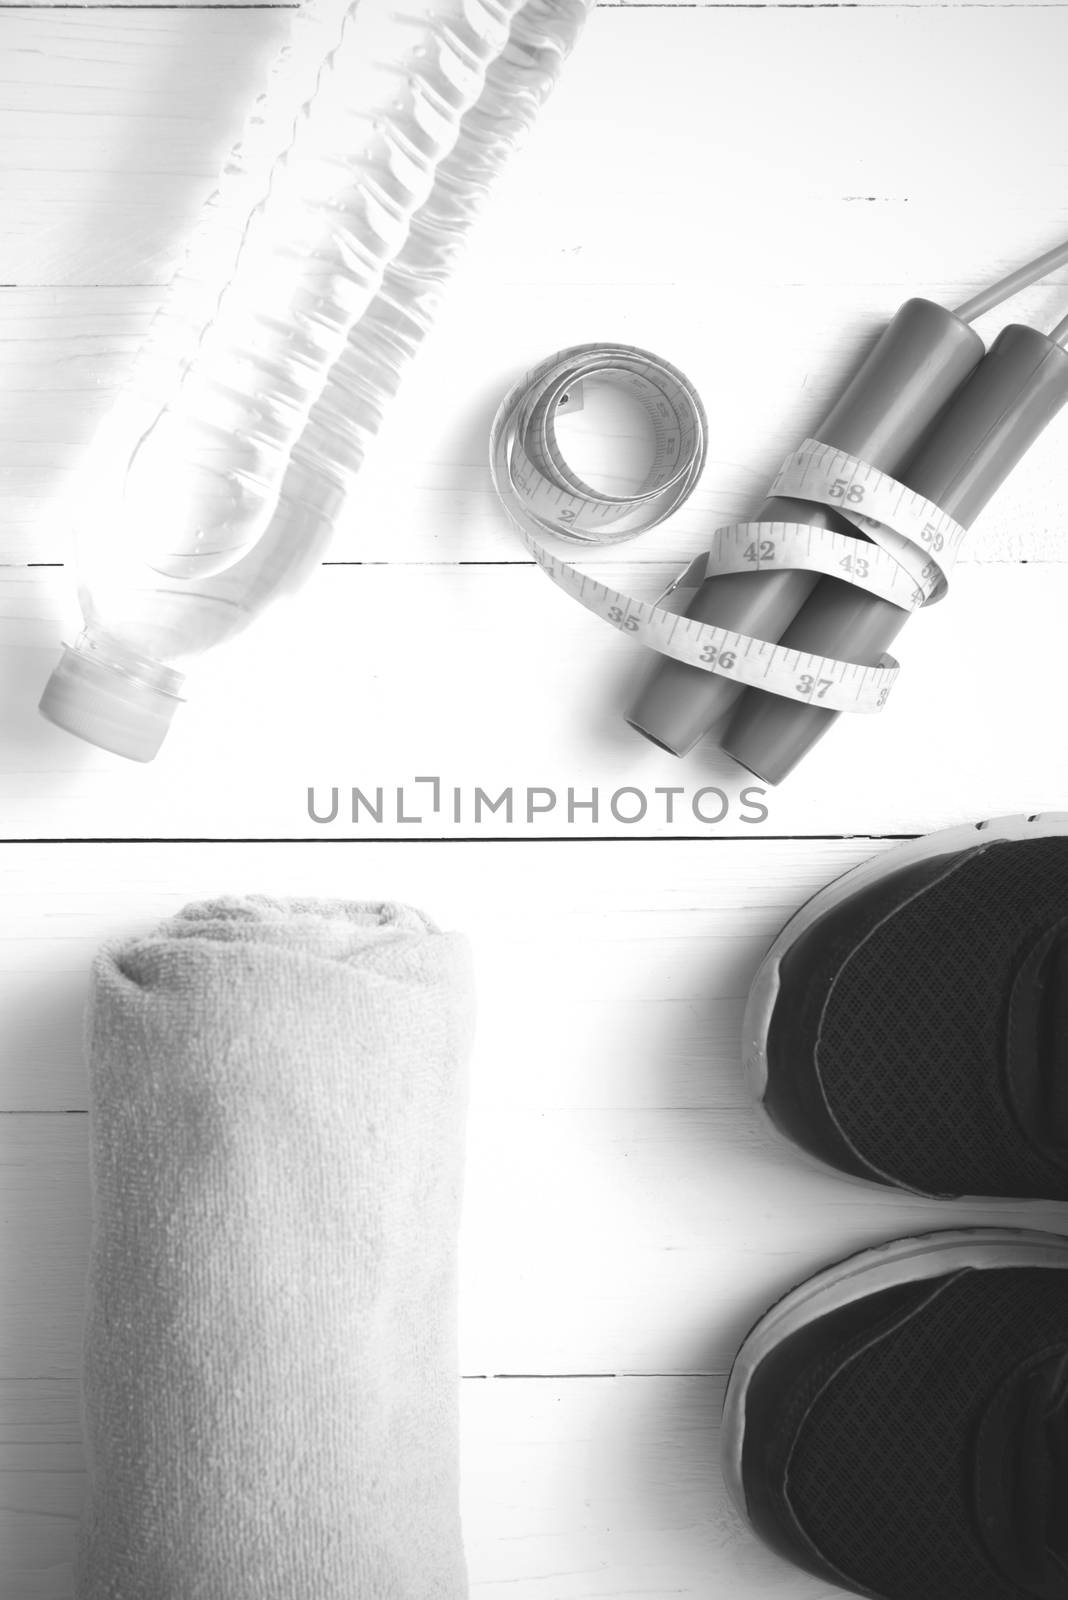 fitness equipment : running shoes,towel,jumping rope,water bottle and measuring tape on white wood table black and white color tone style